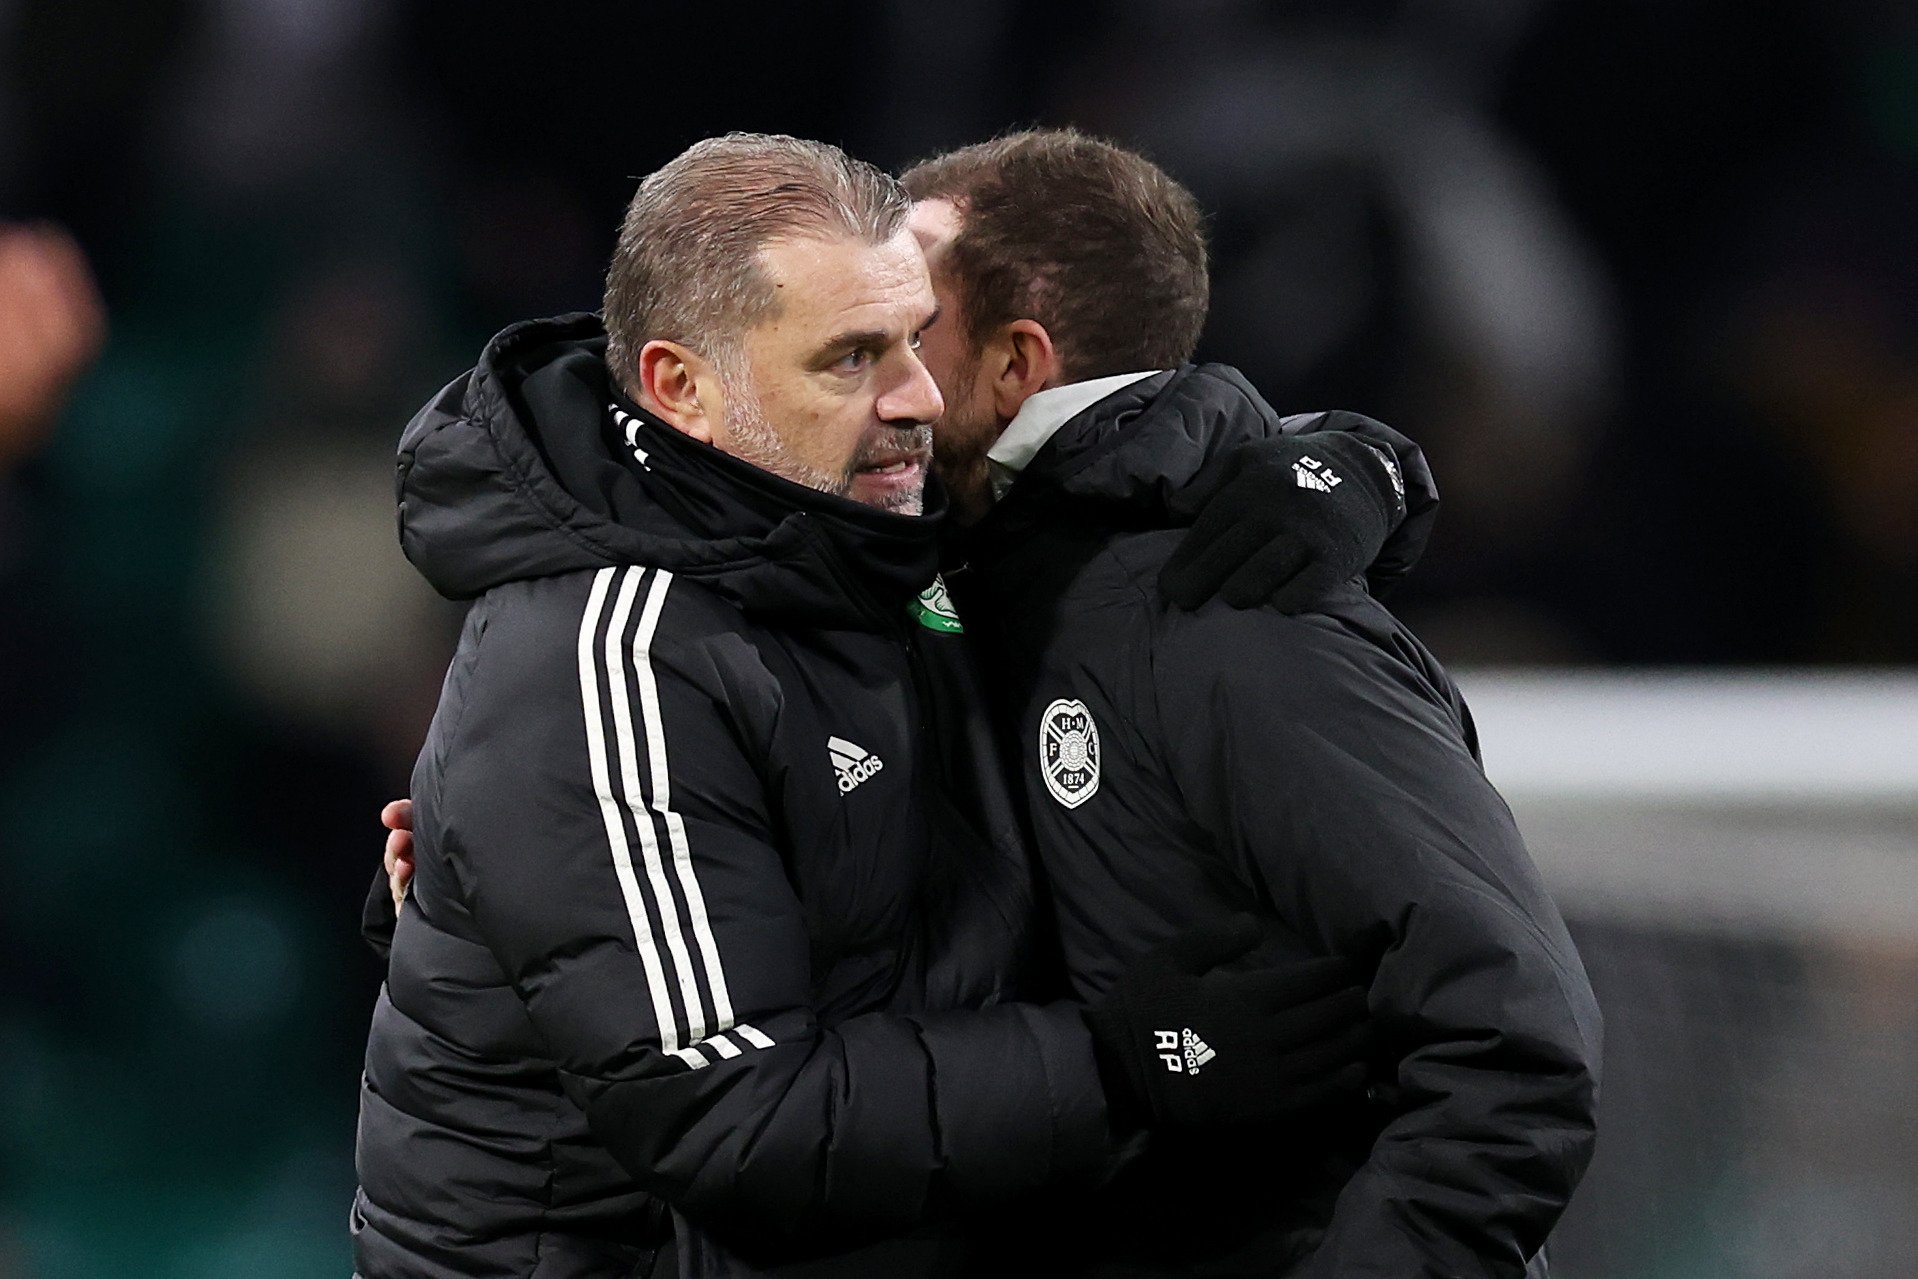 Halliday and Postecoglou shared an embrace after the recent game at Celtic Park